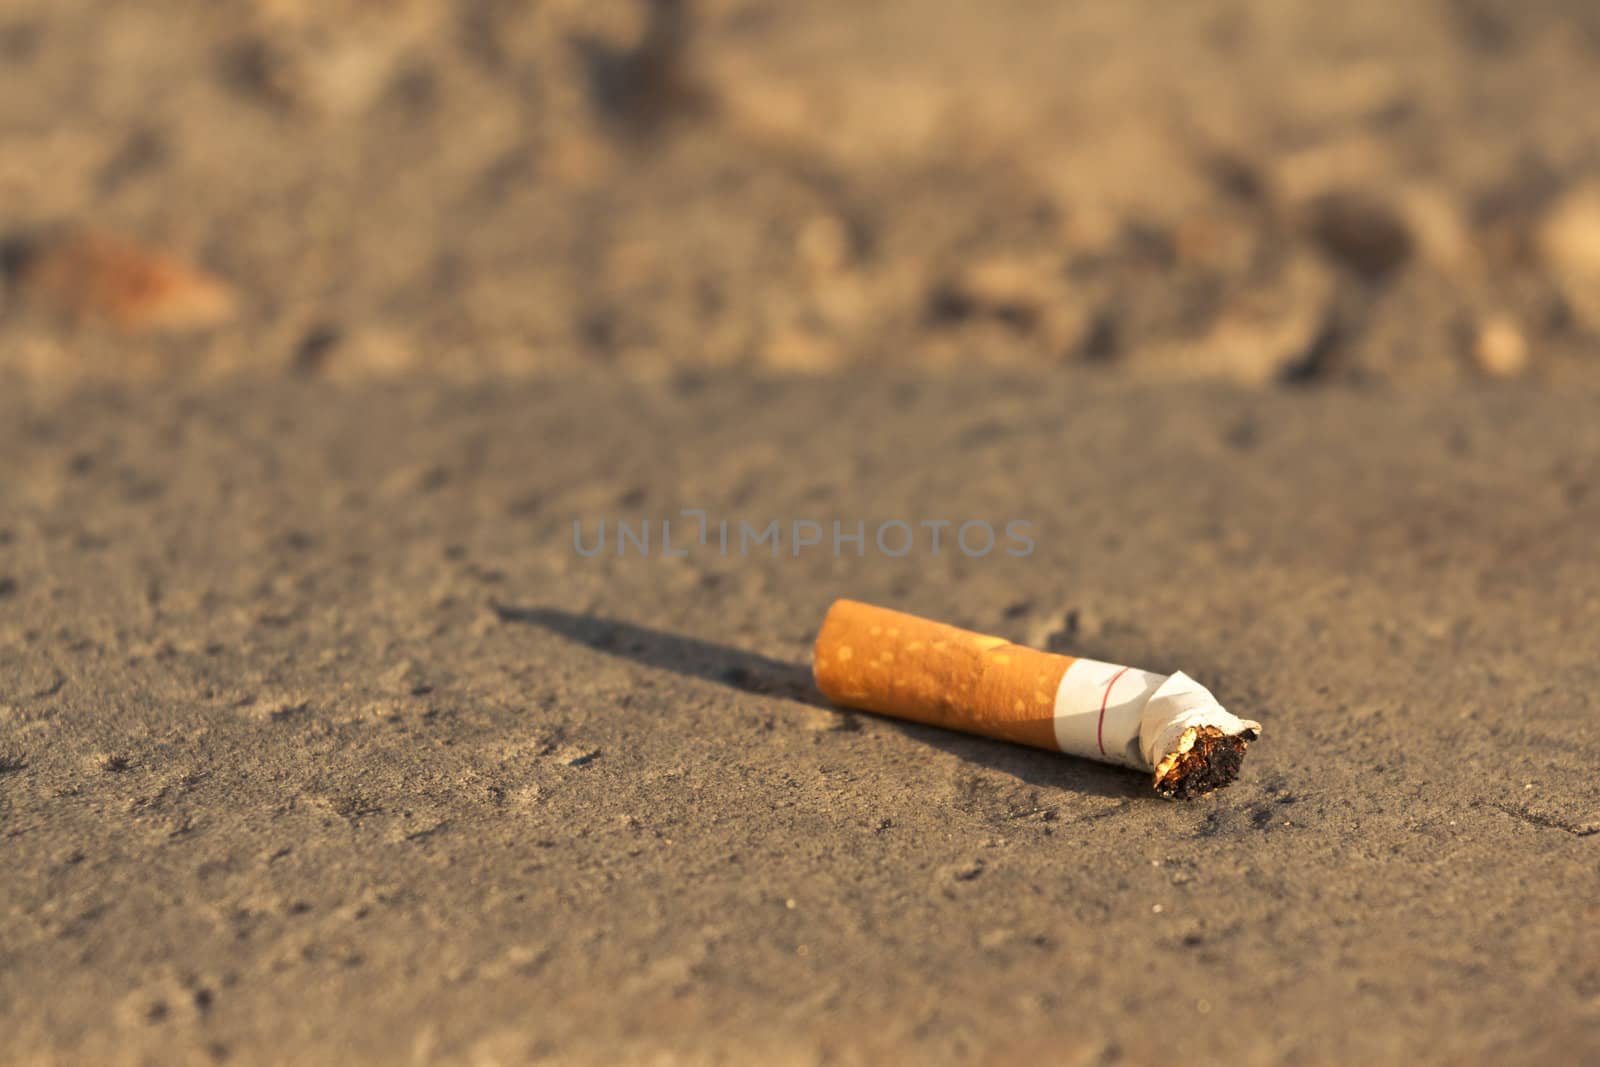 Cigarette fag thrown in the city, horizontal shot with copy space